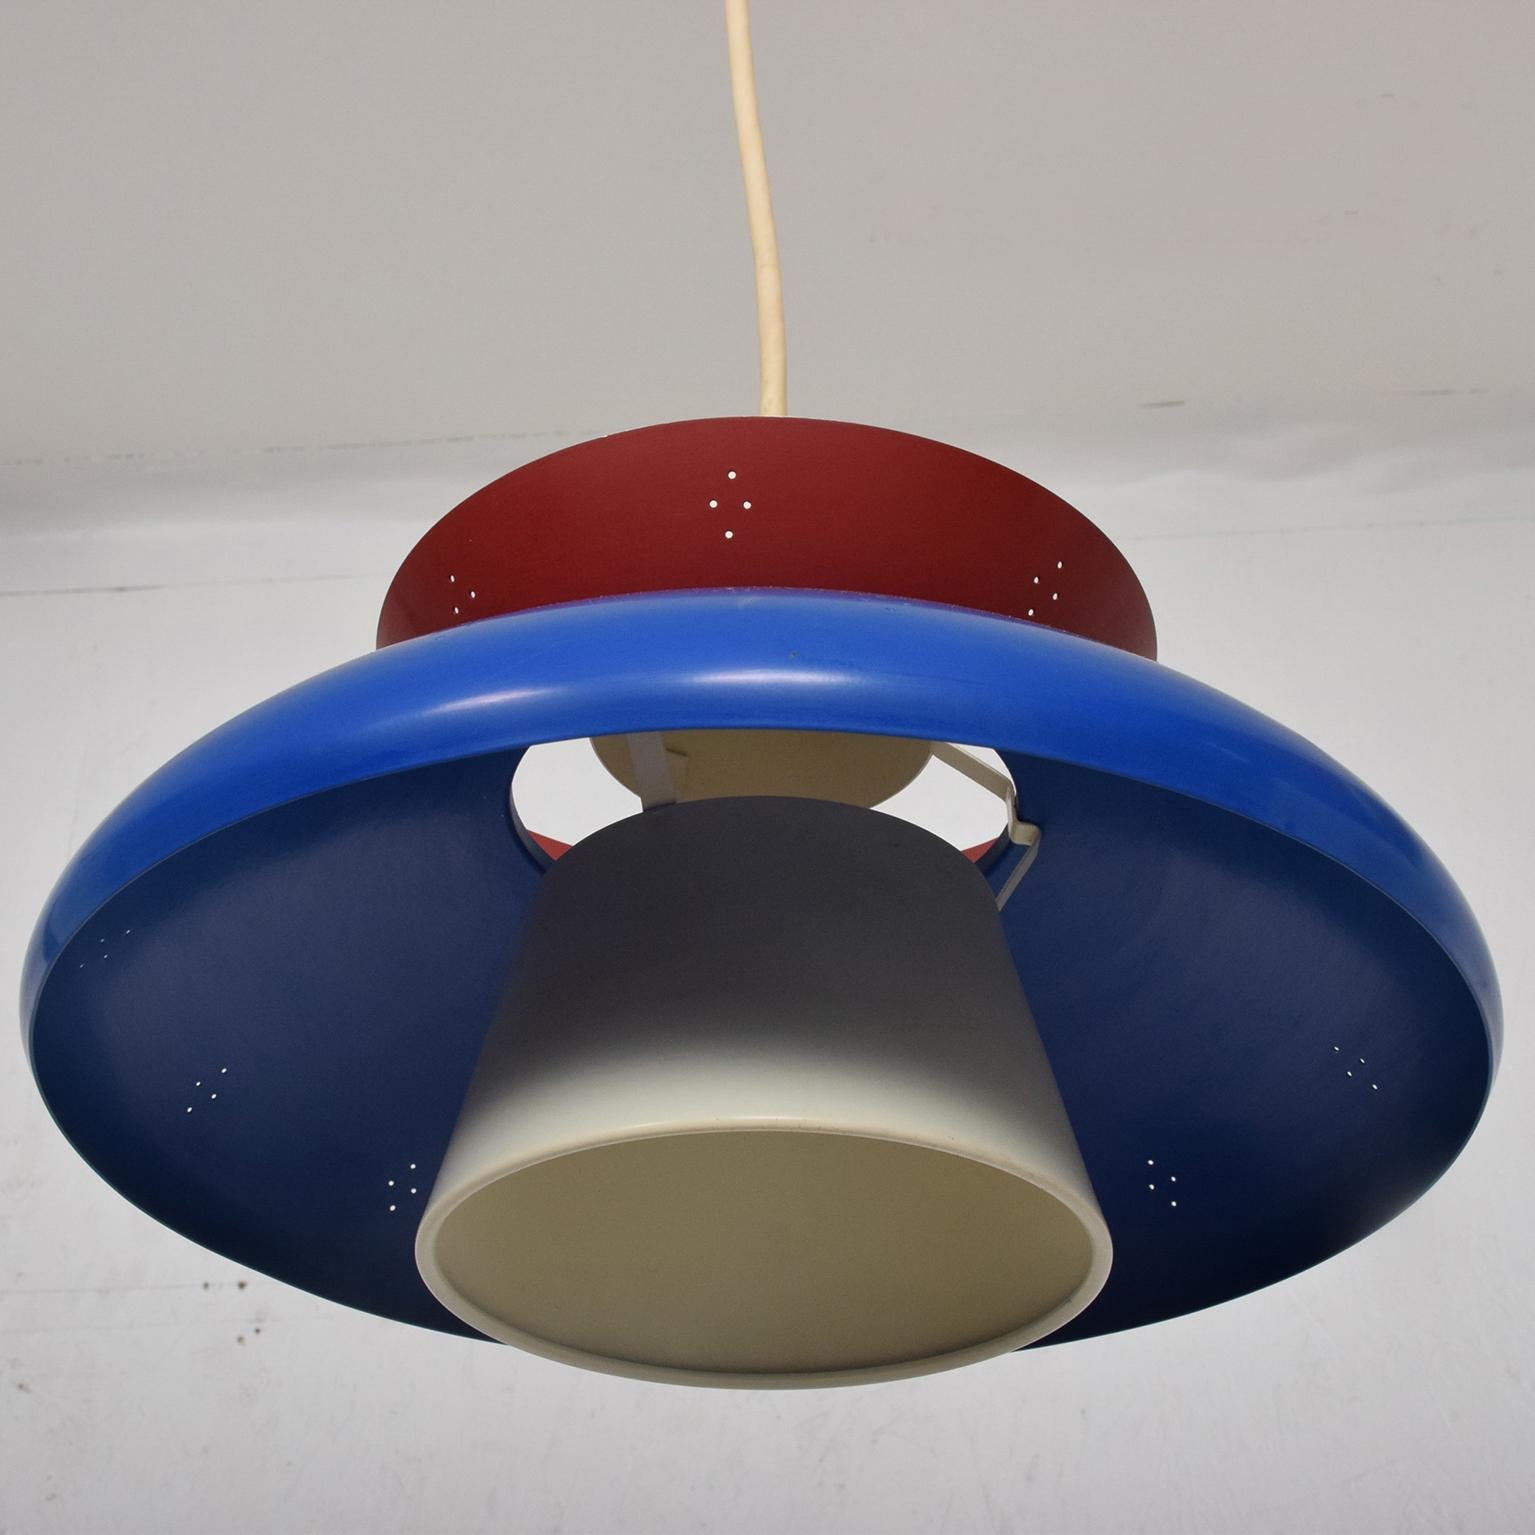 American 1950s USA Patriotic Pendant Light Mid-Century Modern Red White and Blue Lamp